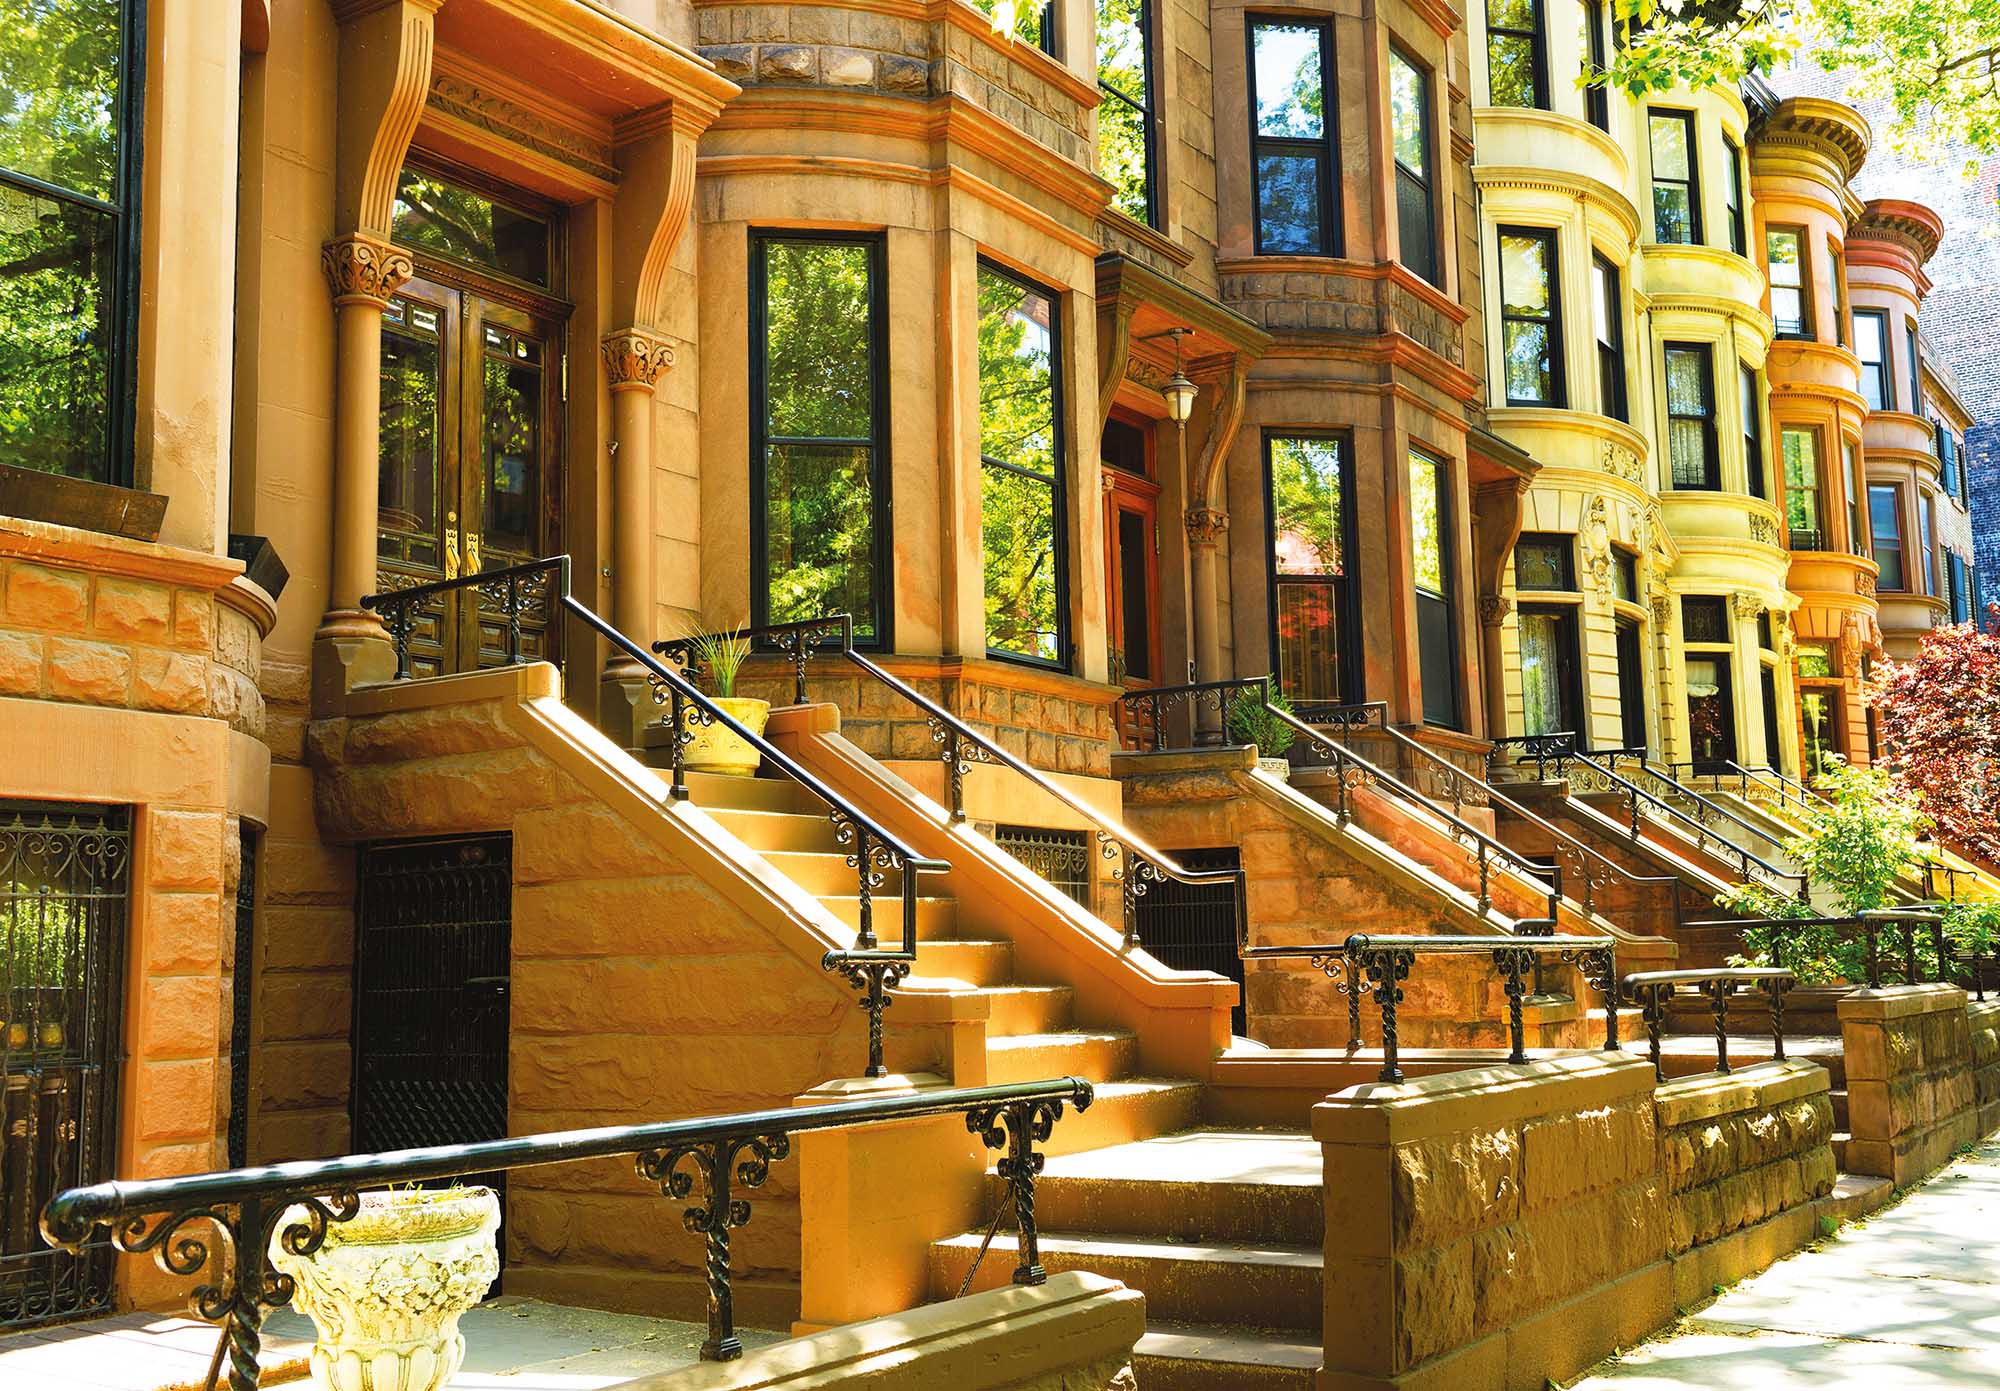 Wallpaper Mural Famous Brownstone Row Houses in Brooklyn, New York |  Muralunique